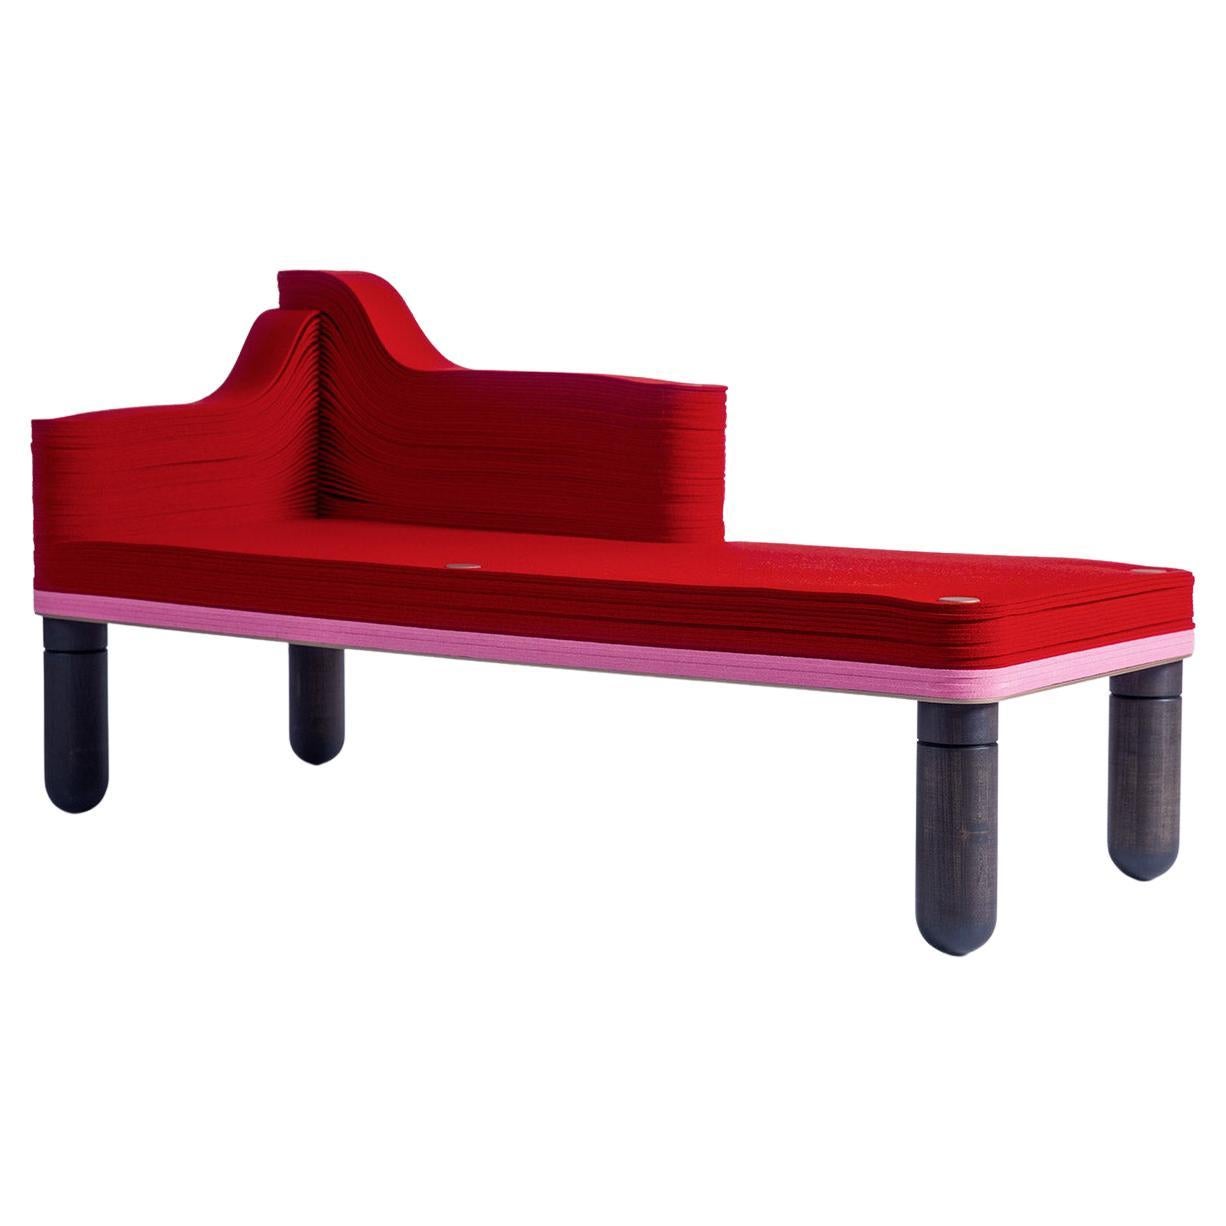 Madame D, Felt and Wood Chaise Lounge, Drake / Anderson in Stackabl